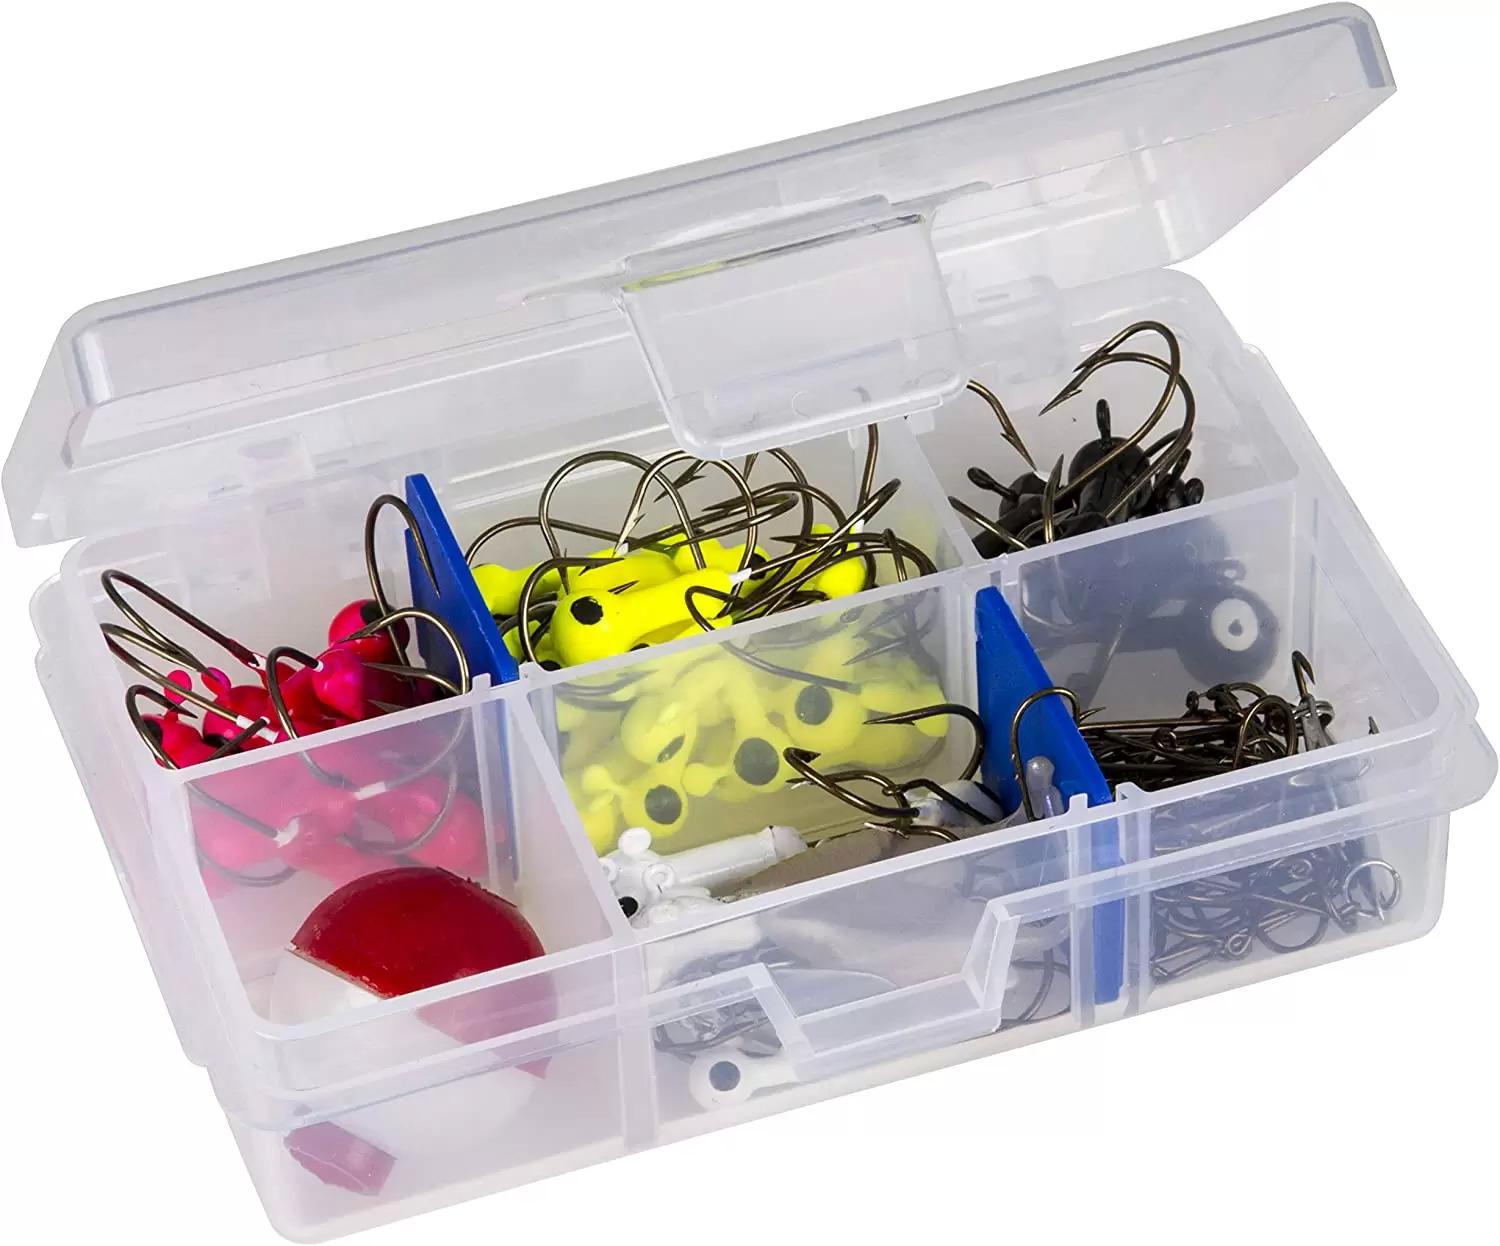 Flambeau Outdoors Tuff Trainer Fishing Tackle Tray Box for $1.64